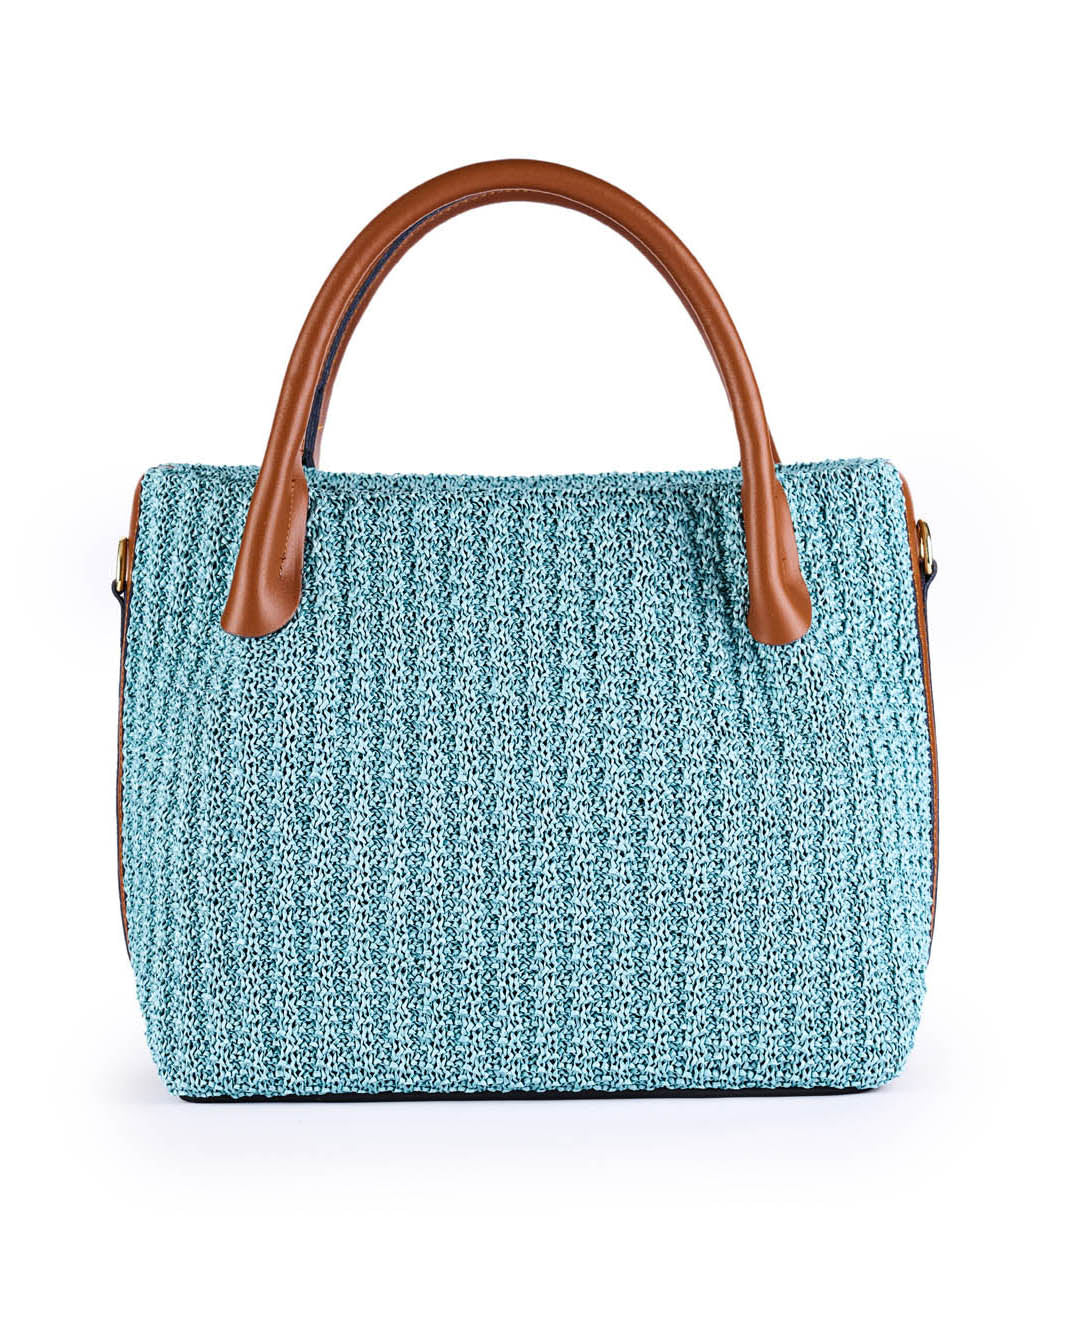 Blue woven handbag with brown leather handles